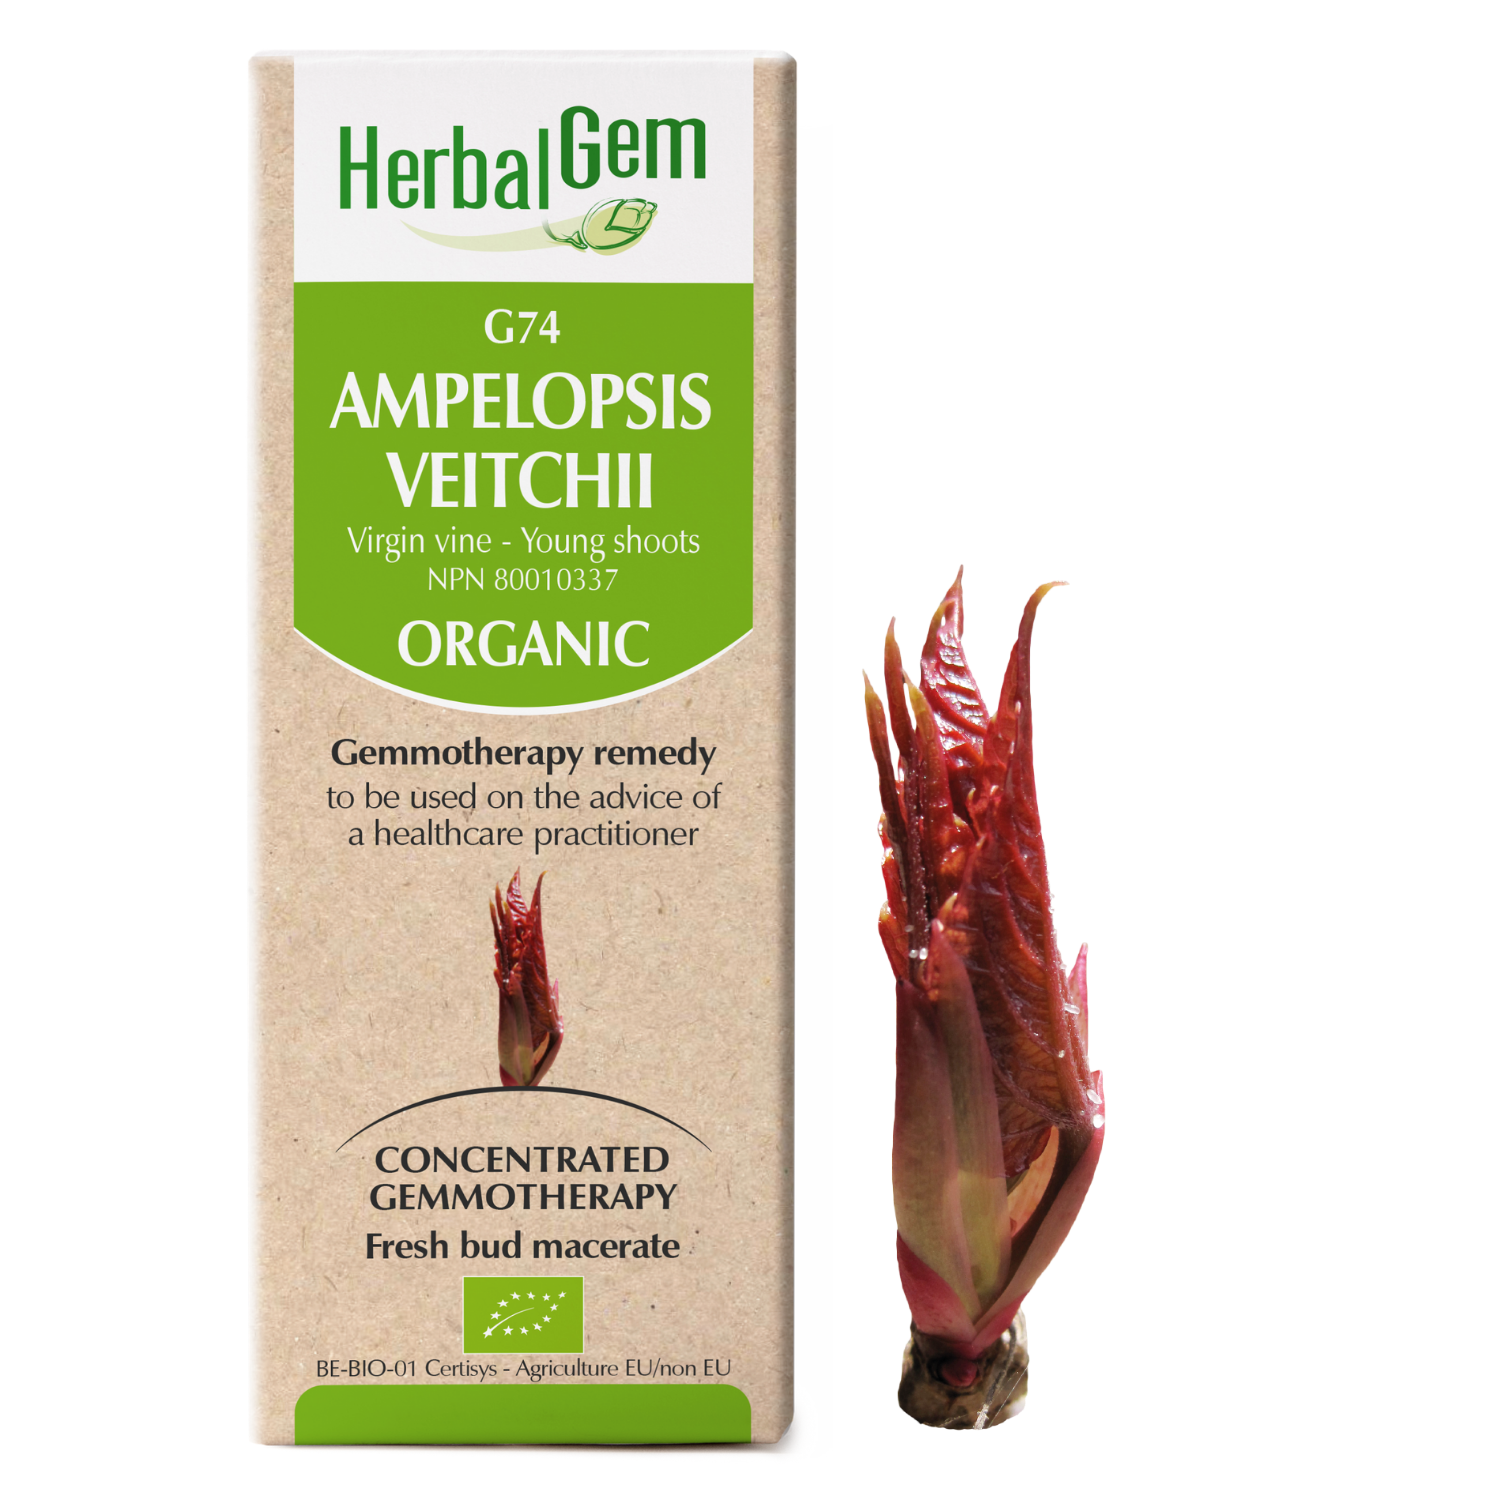 G74 Ampelopsis veitchii, Gemmotherapy, Organic, Virginia creeper Young shoots